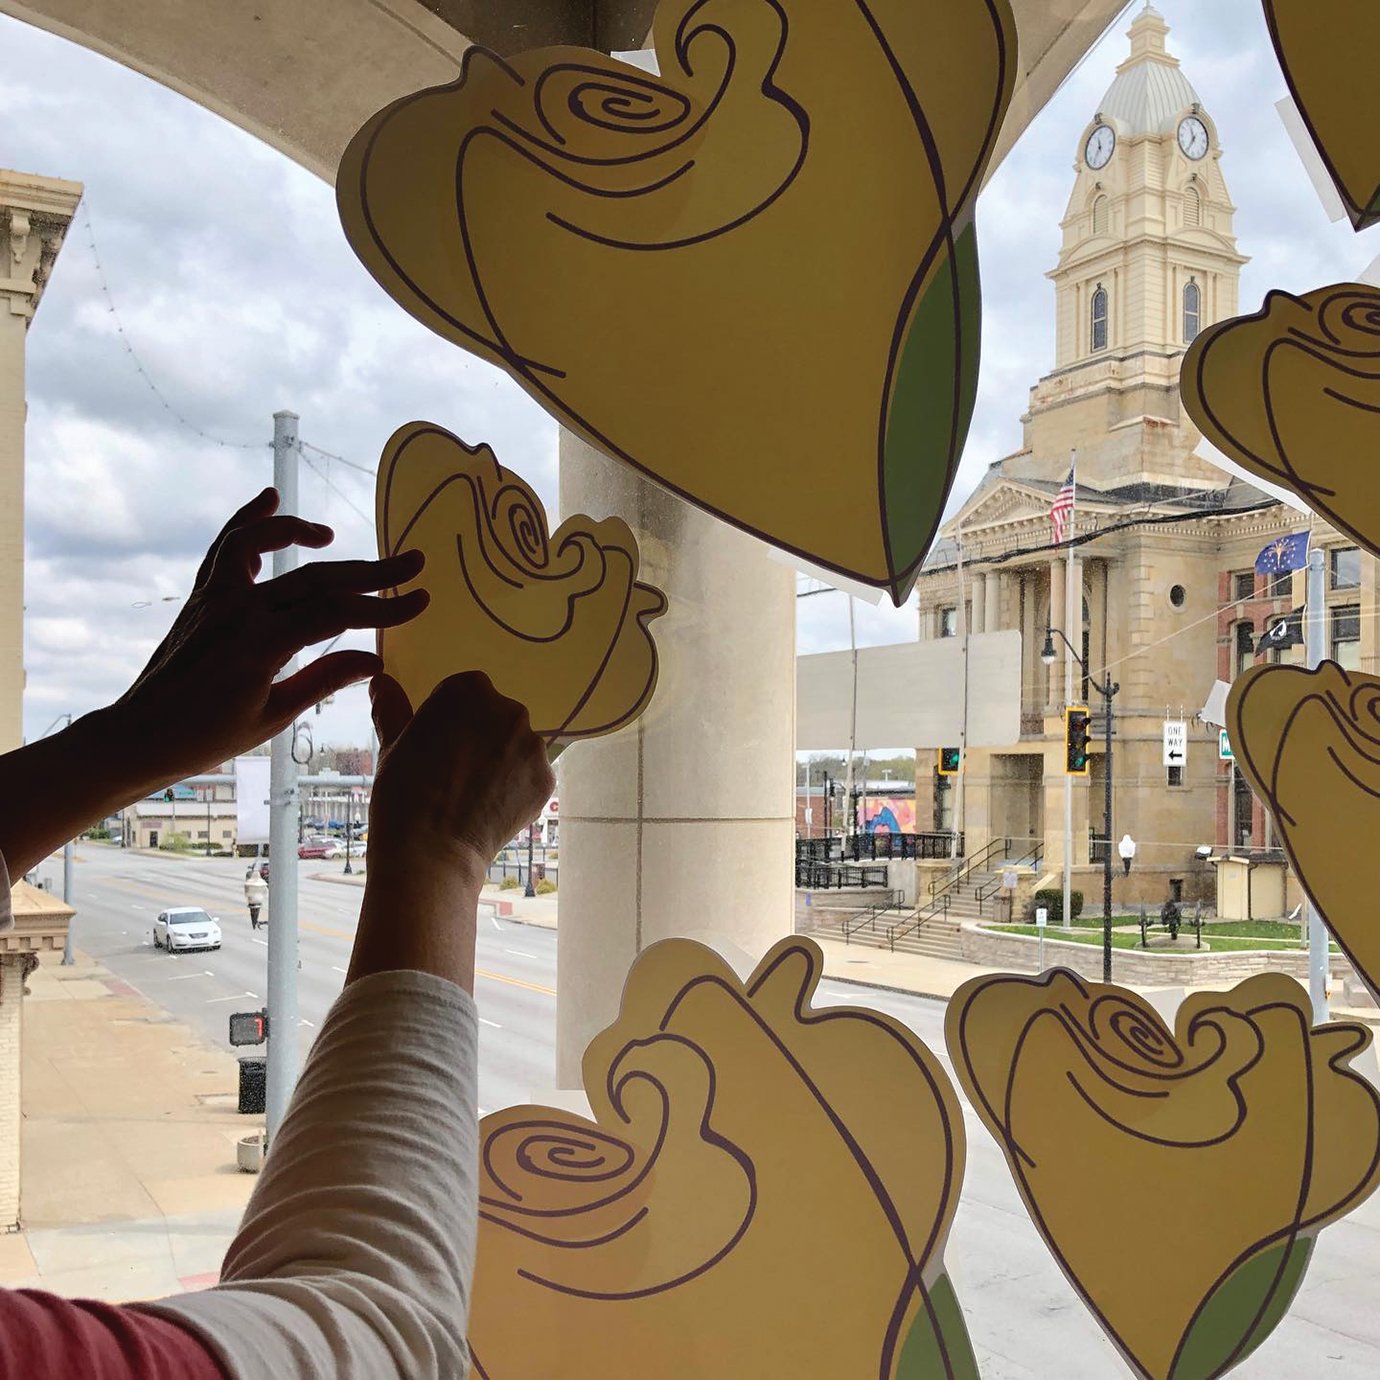 Yellow roses, which traditionally symbolize friendship, are installed on the second floor of the Fusion 54 building to show support for local businesses during times of crisis.